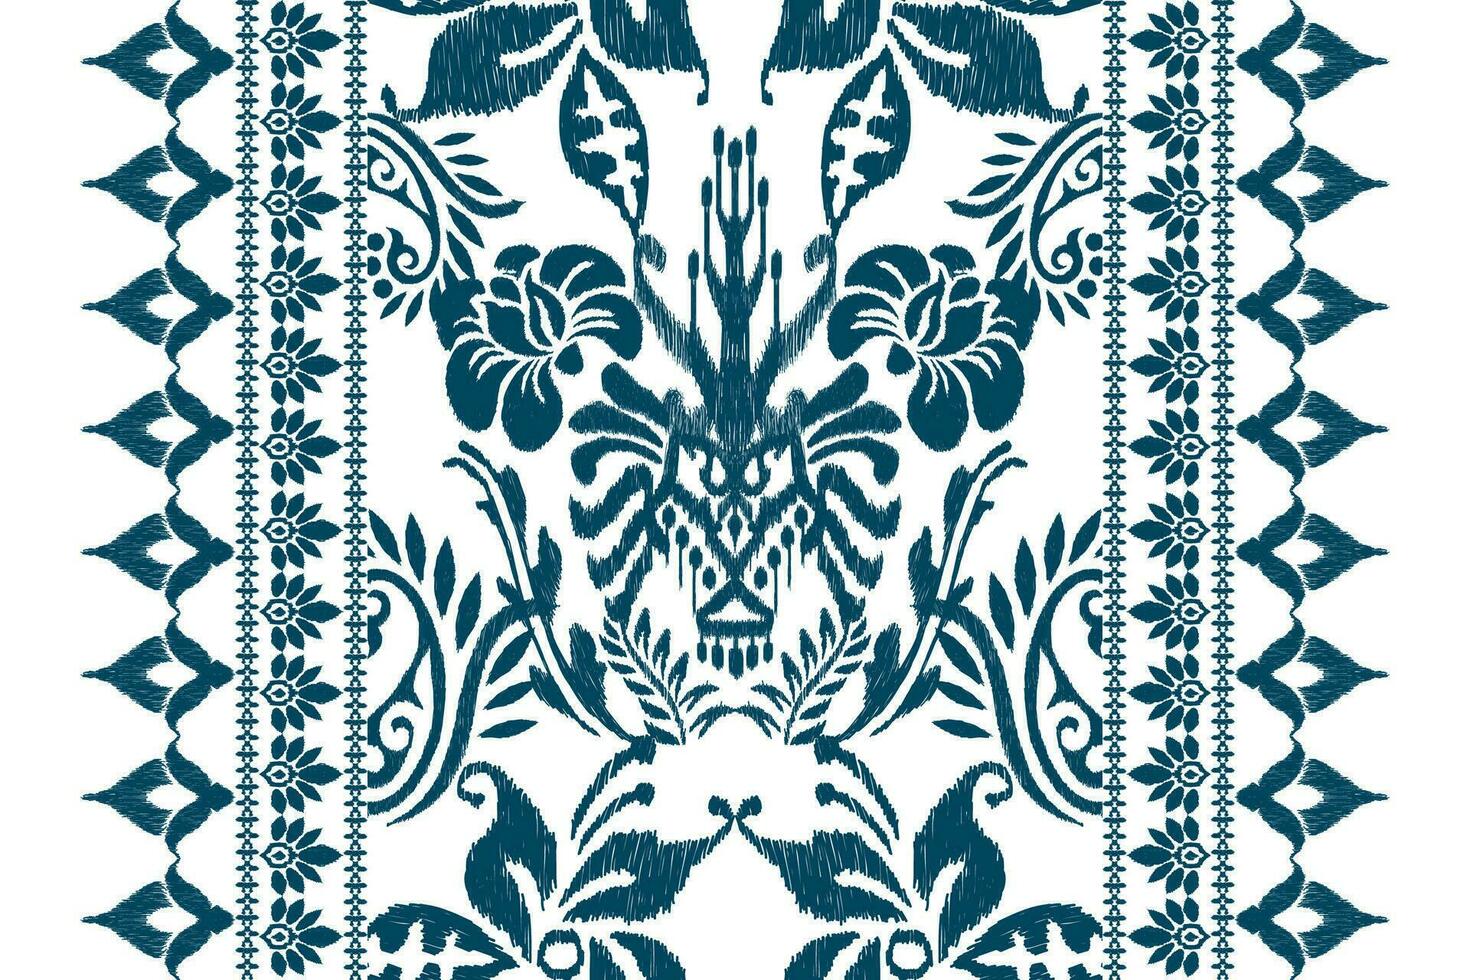 Ikat floral paisley embroidery.blue and white background.Ikat embroidery oriental pattern traditional.Aztec style abstract vector illustration.design for texture,fabric,clothing,wrapping,decoration.